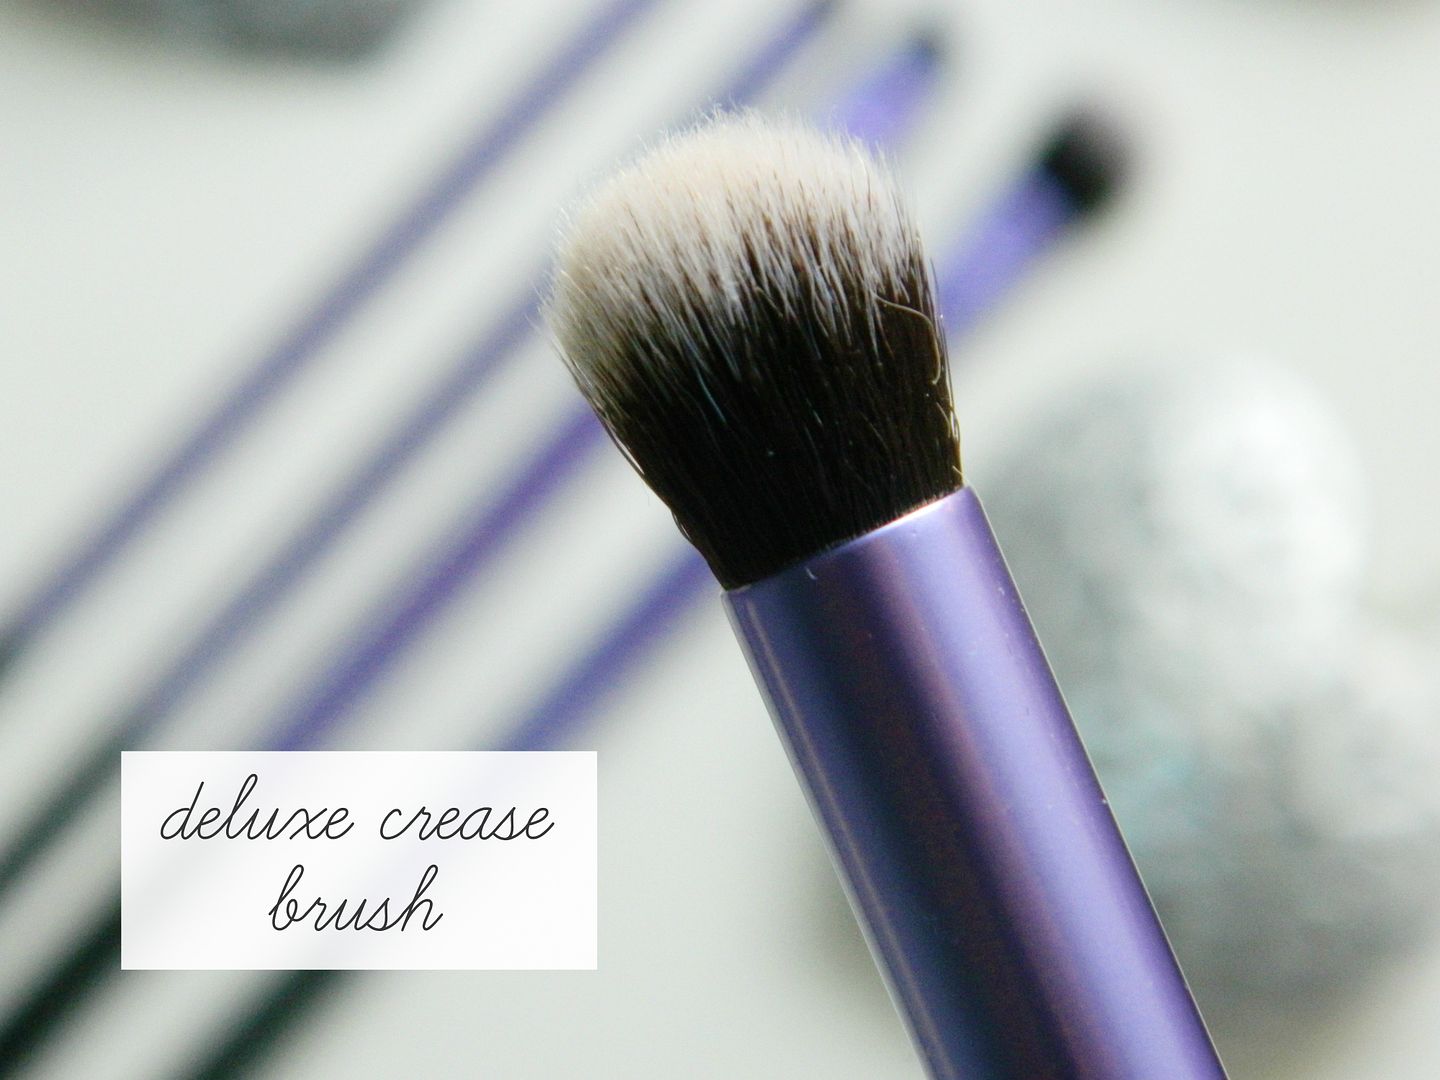 Real Techniques Starter Set Eye Makeup Brushes Deluxe Crease Brush Review Belle-amie UK Beauty Fashion Lifestyle Blog